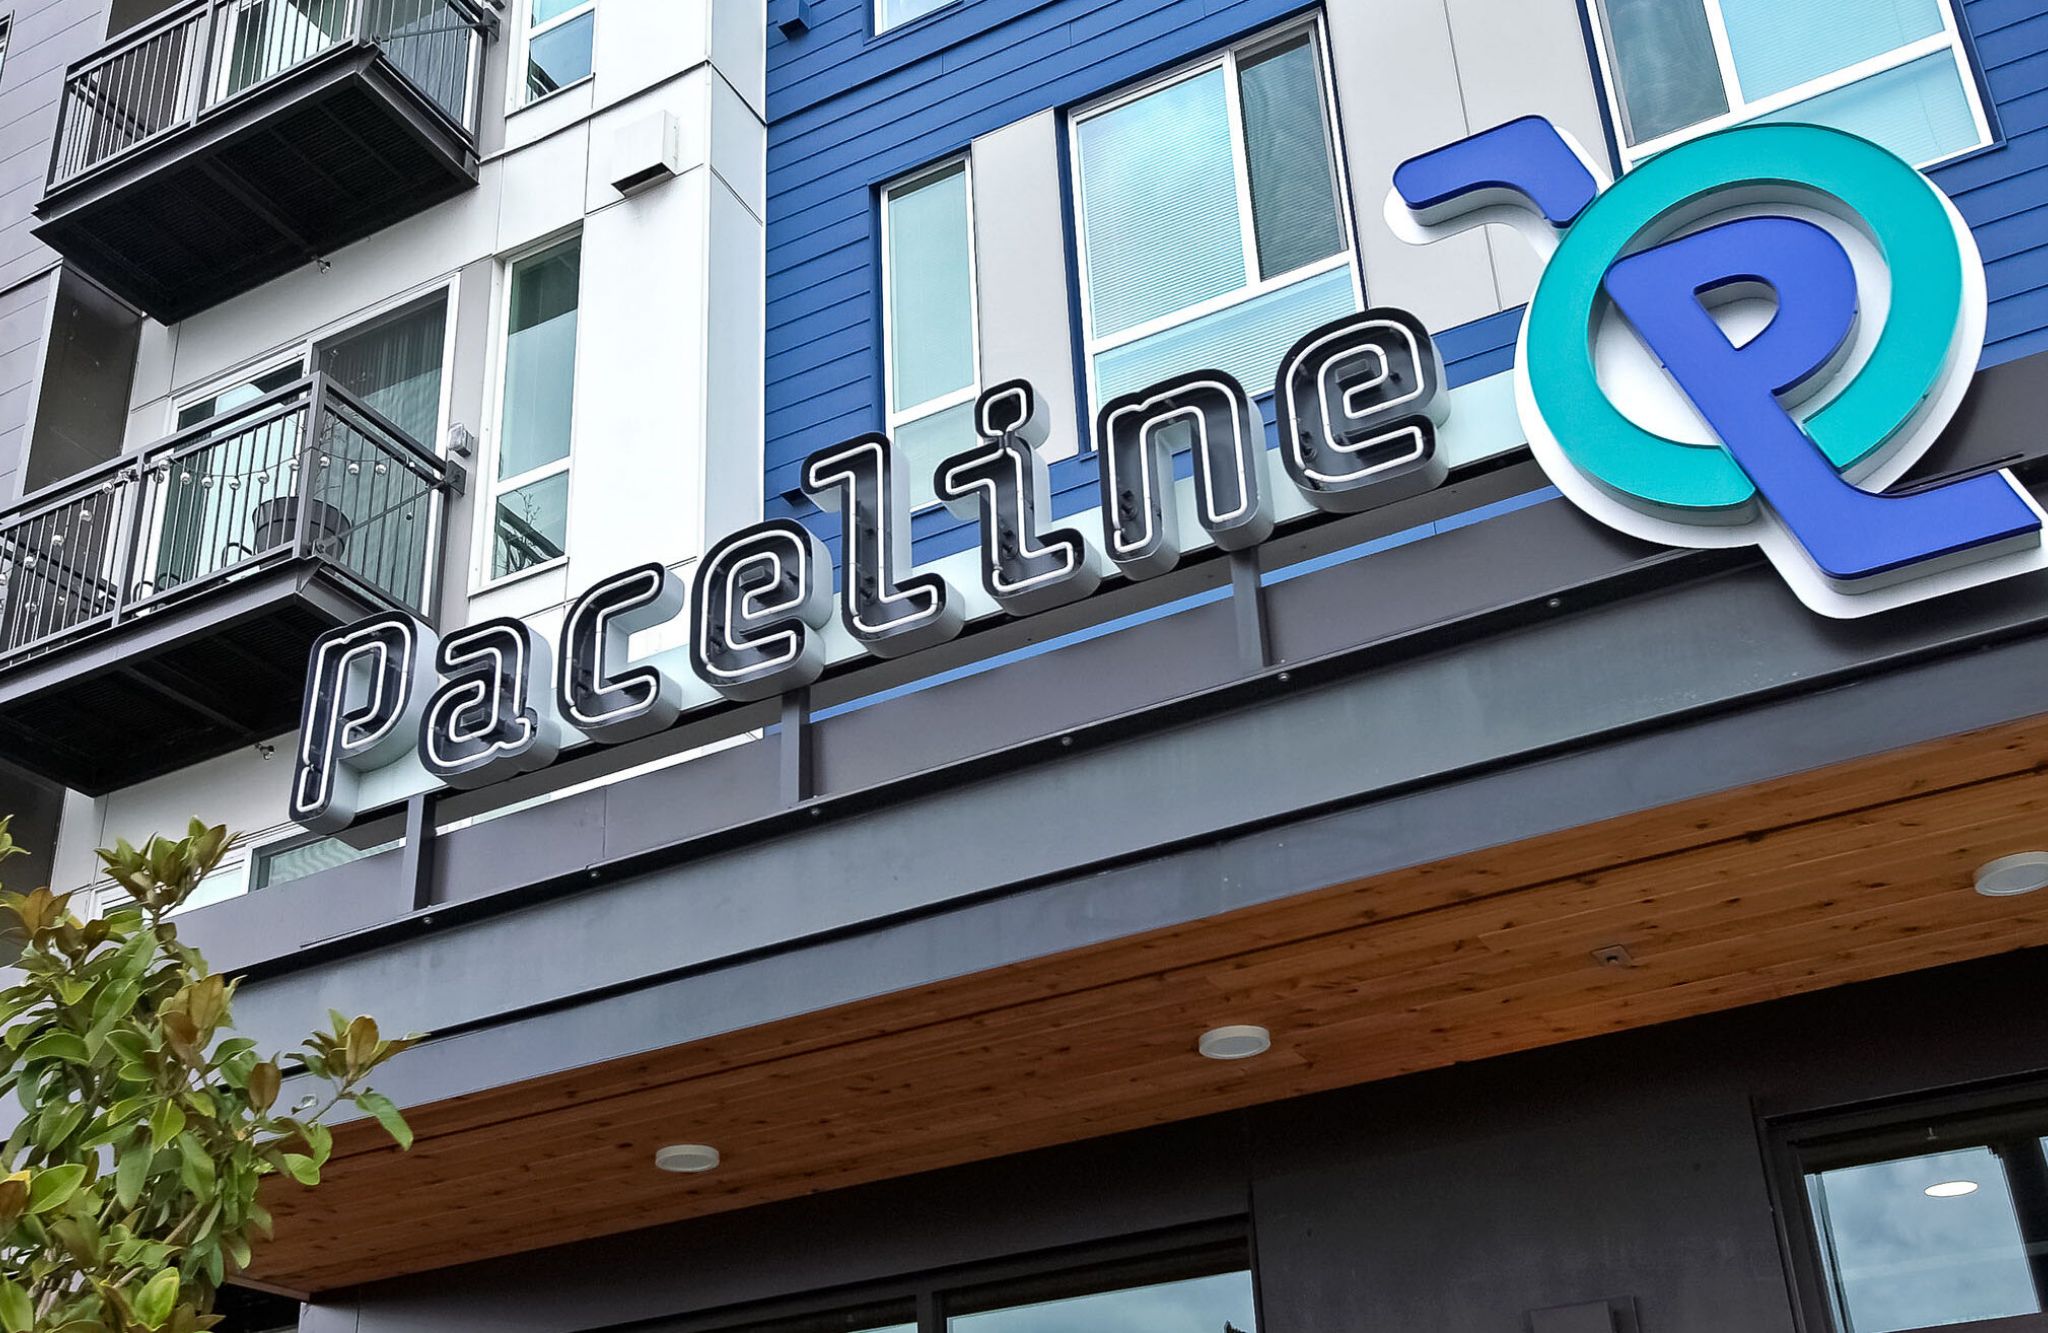 Exterior sign of Paceline apartments